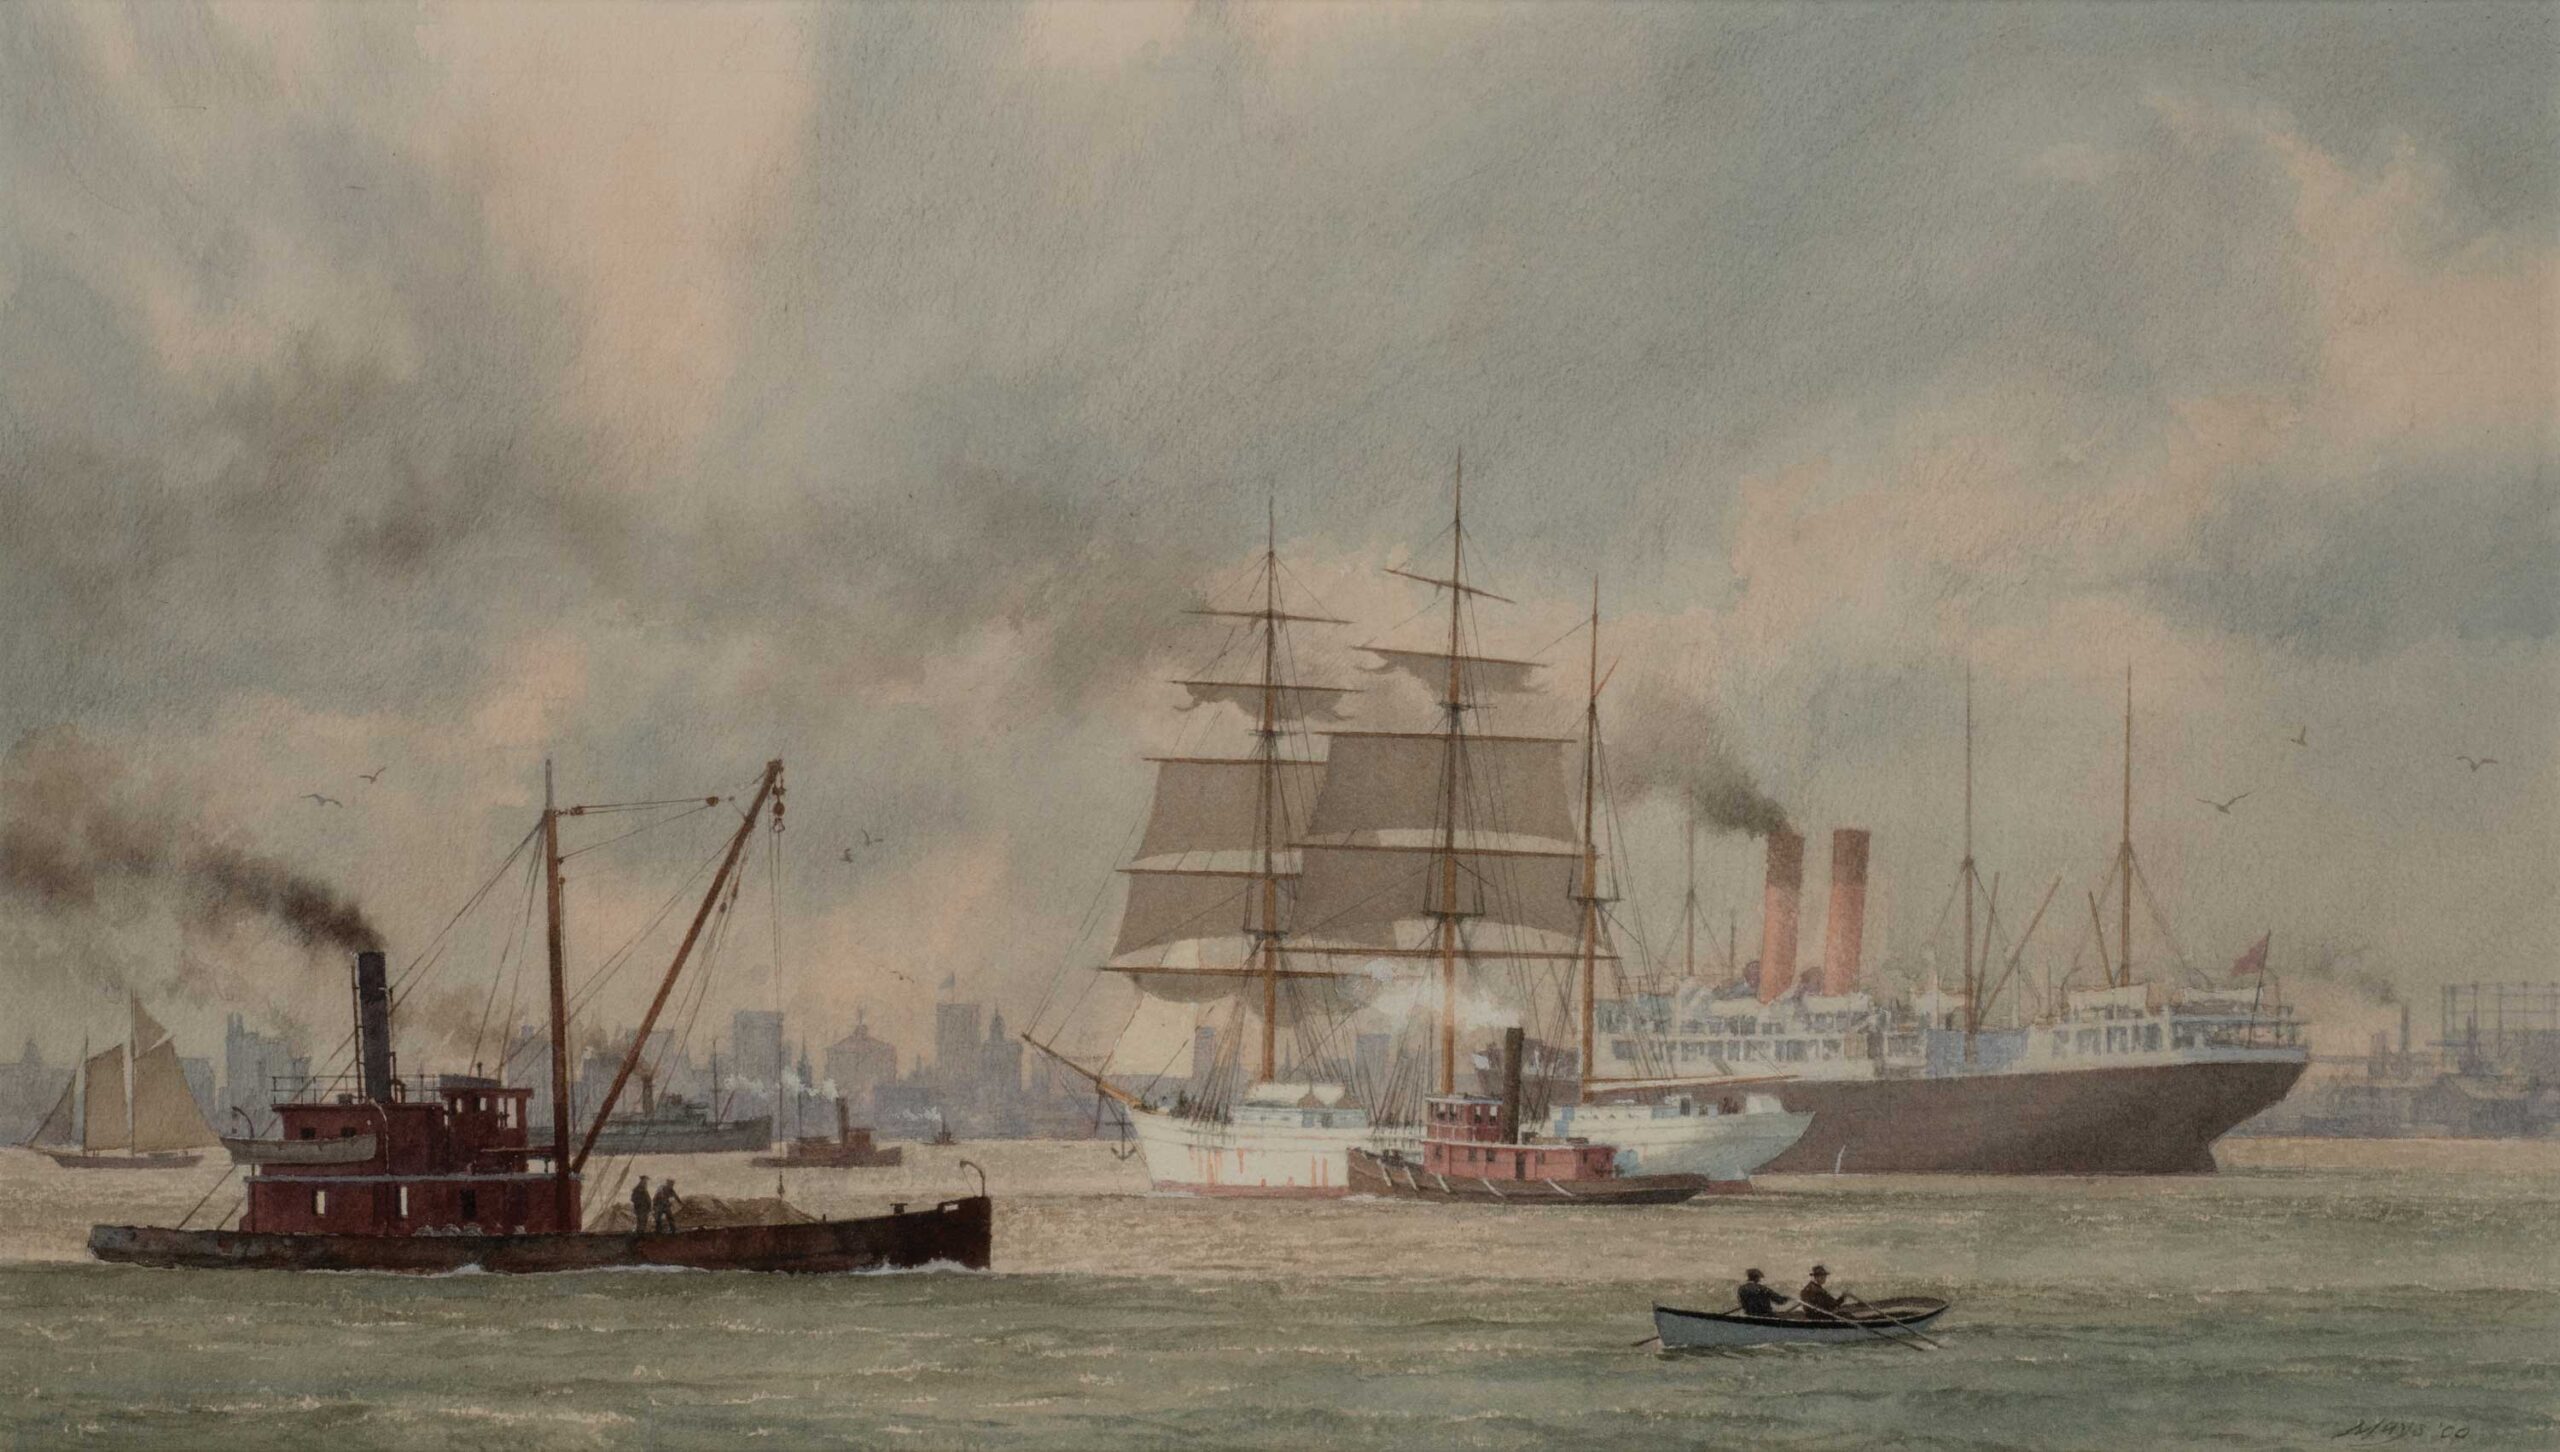 Lewis "Victor" Mays, Jr. (1927–2015), New York Harbor in the Early Twentieth Century, 2000, watercolor on paper, 11 2/3 x 20 1/2 in.